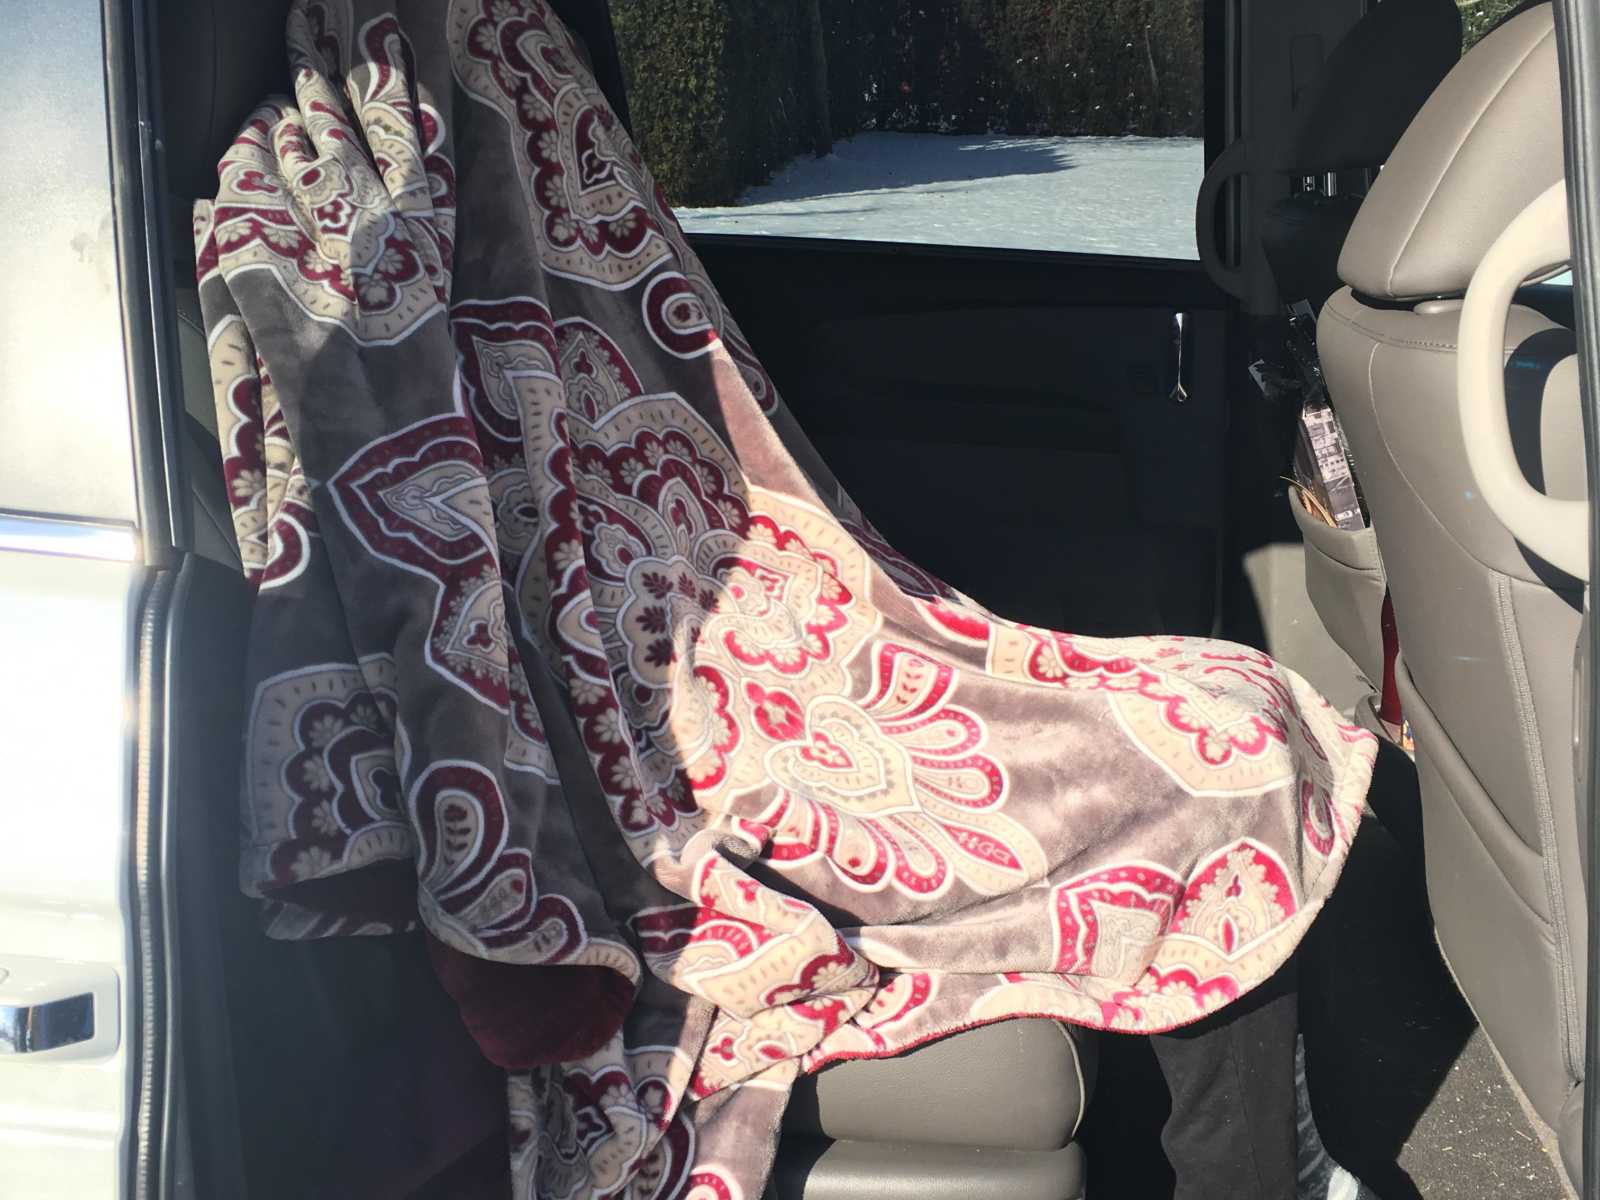 View from outside the car door of woman with dementia sitting in backseat with blanket over her head